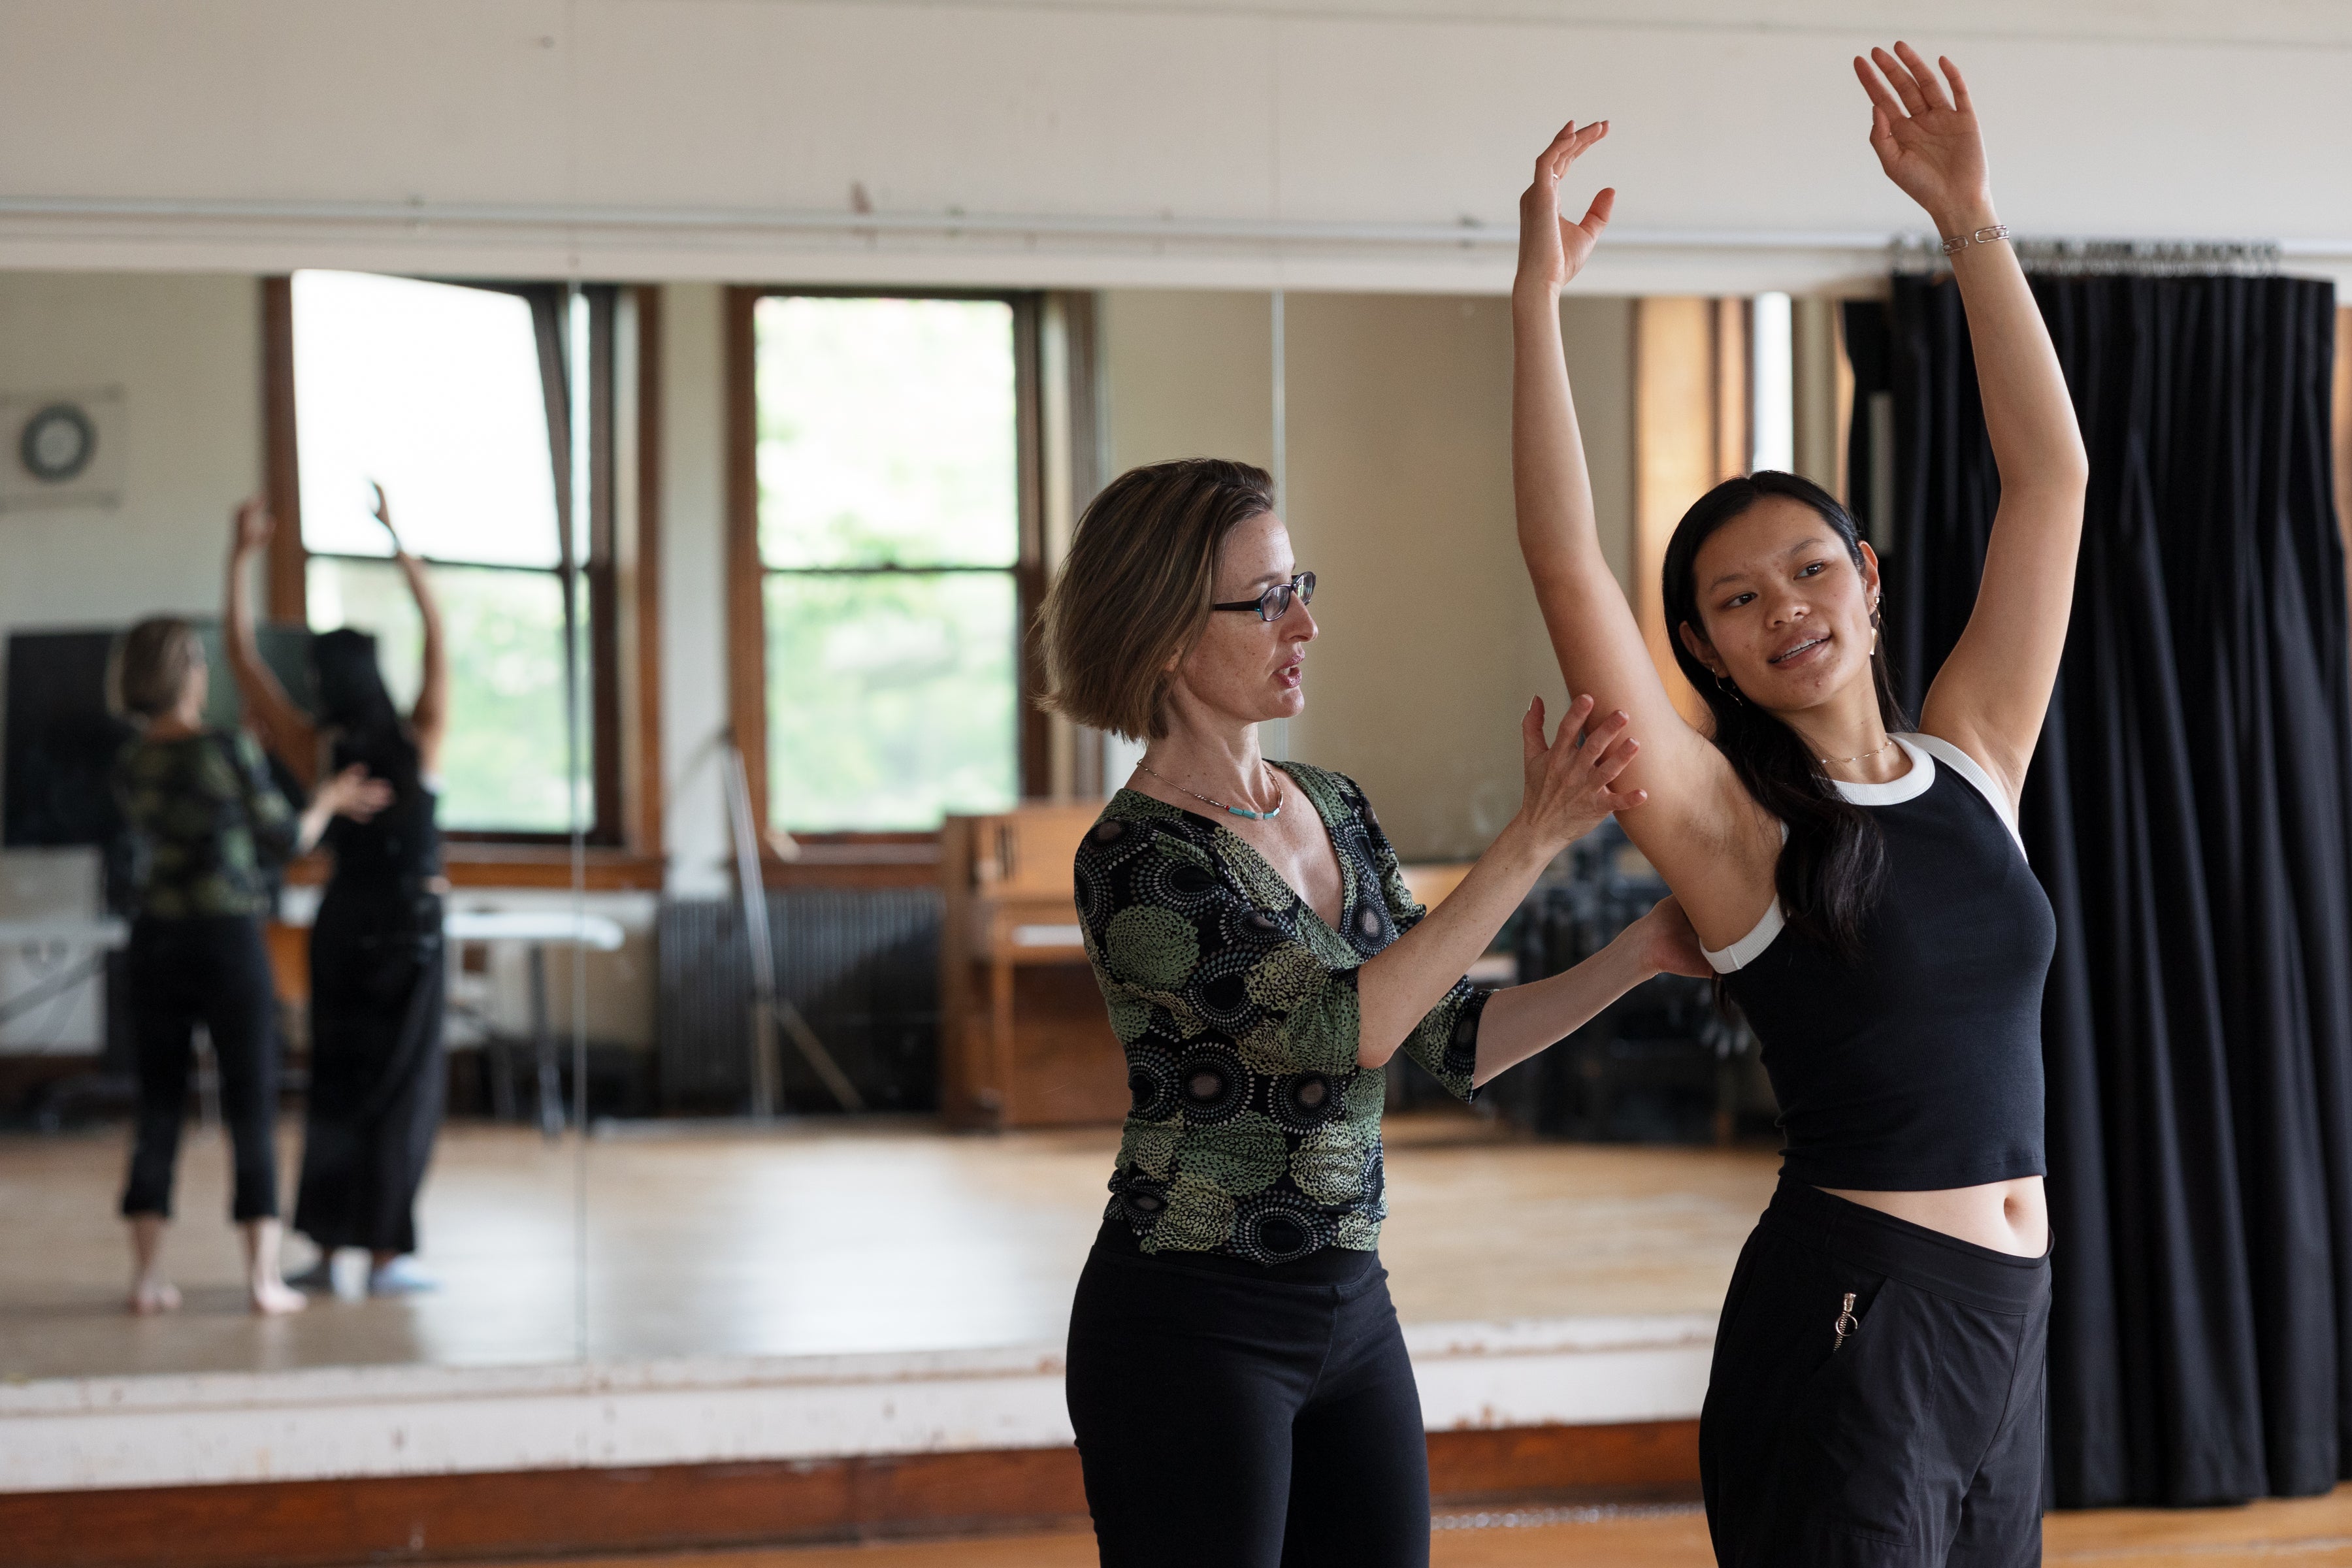 Faculty instructs dance student in sunlight studio.